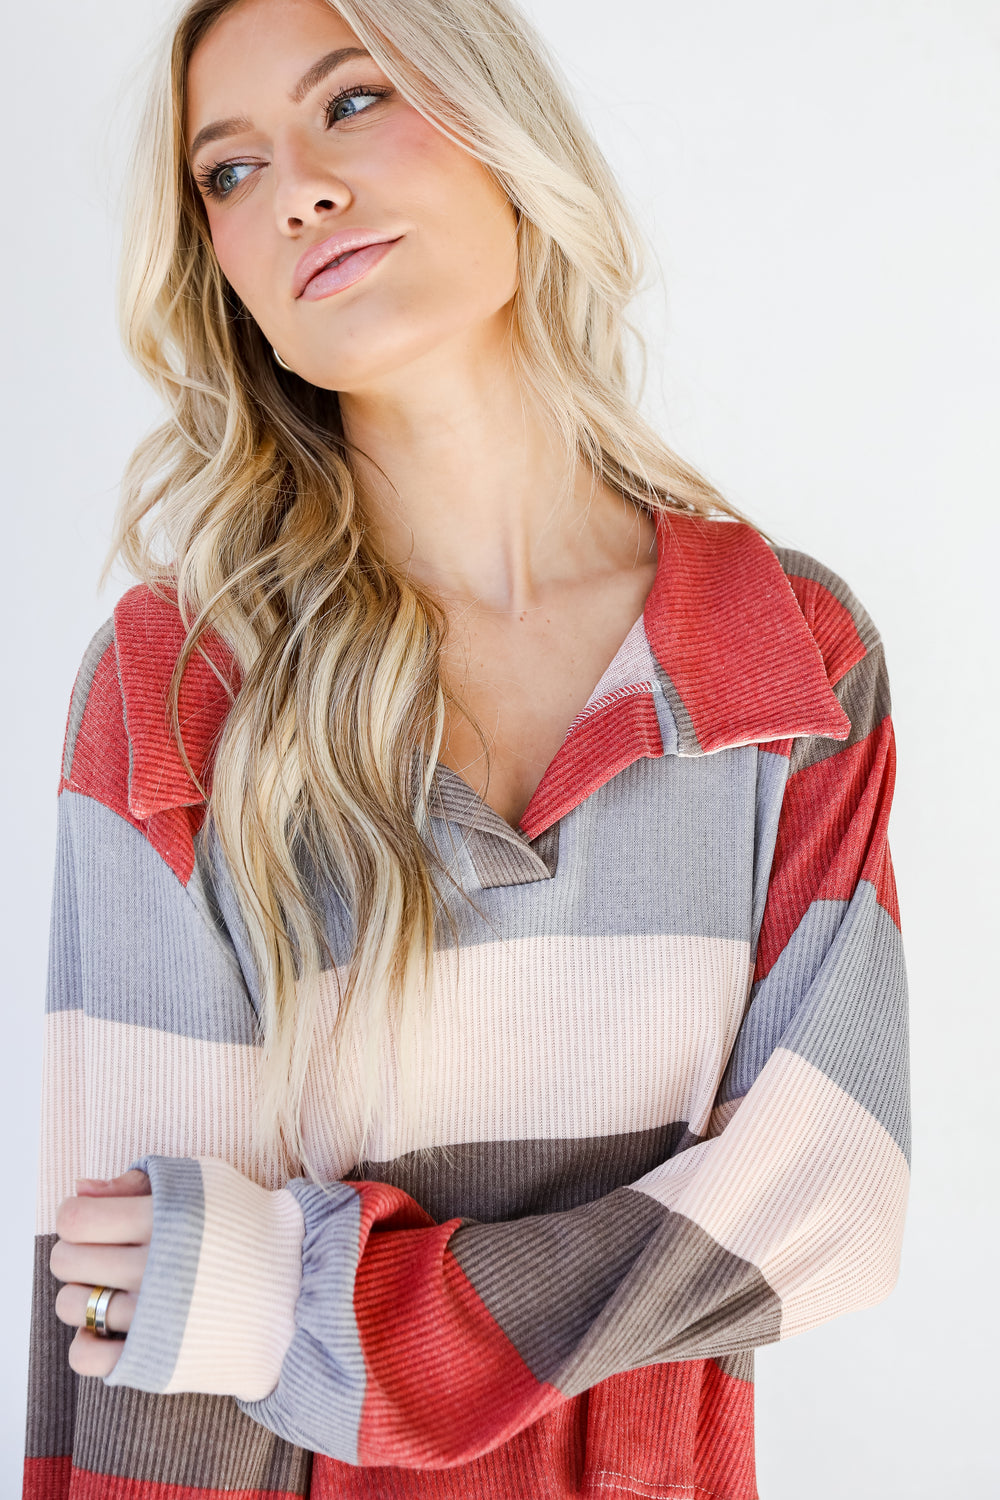 Striped Collared Top from dress up